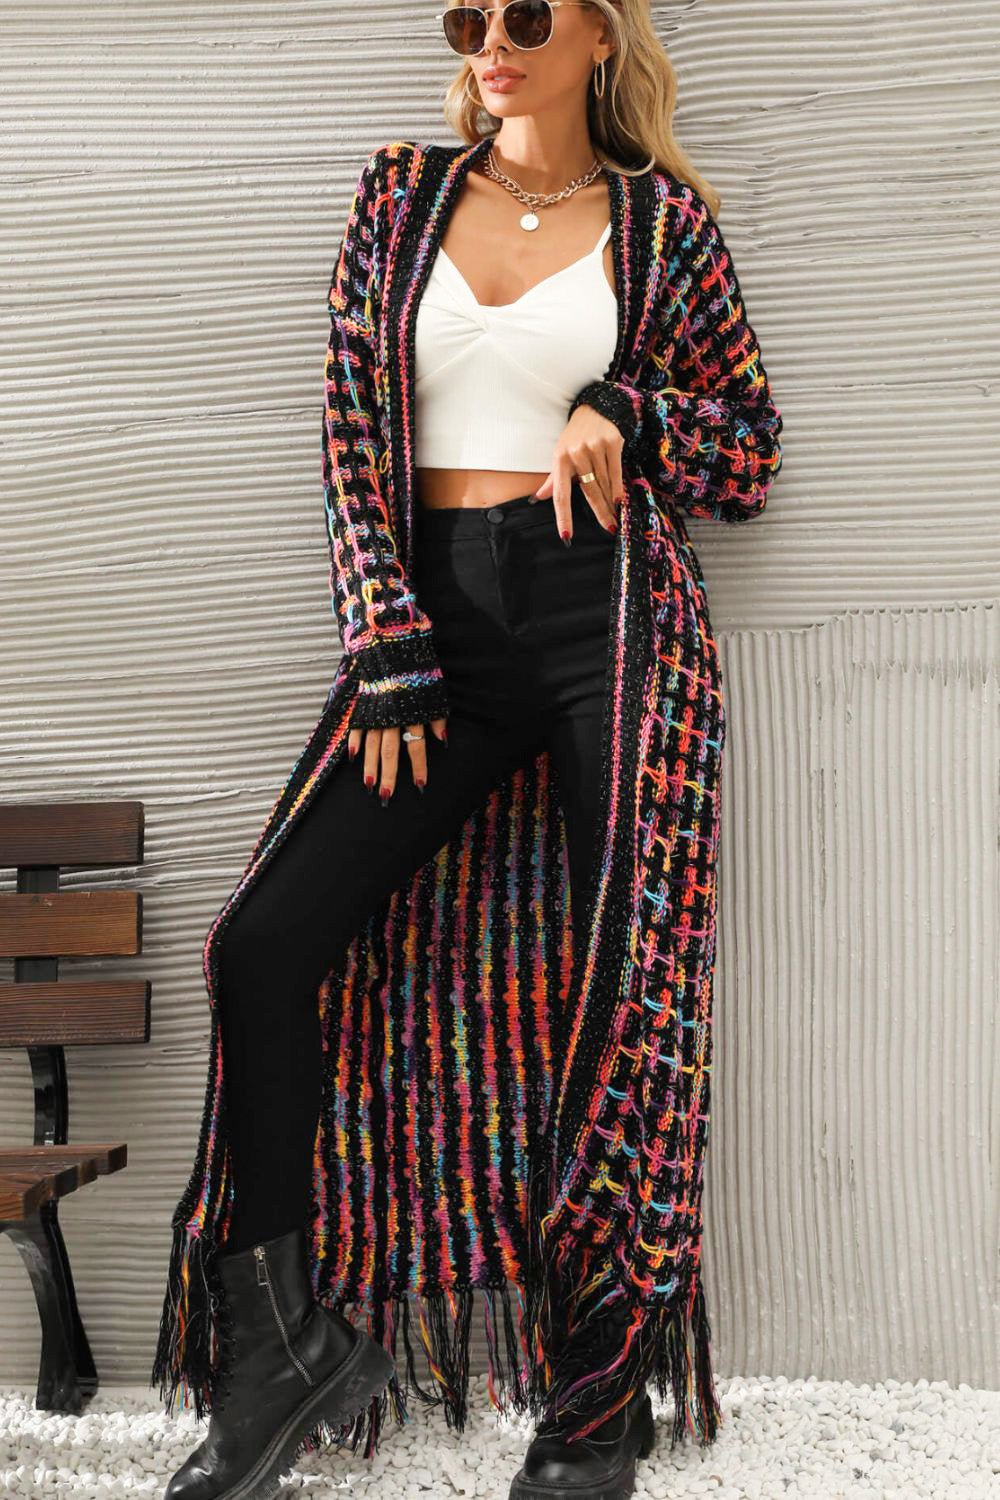 "Multicolored Open Front Fringe Hem Cardigan - A Garden of Romance at Your Fingertips - Elevate Your Style with Vibrant Colors" - Guy Christopher